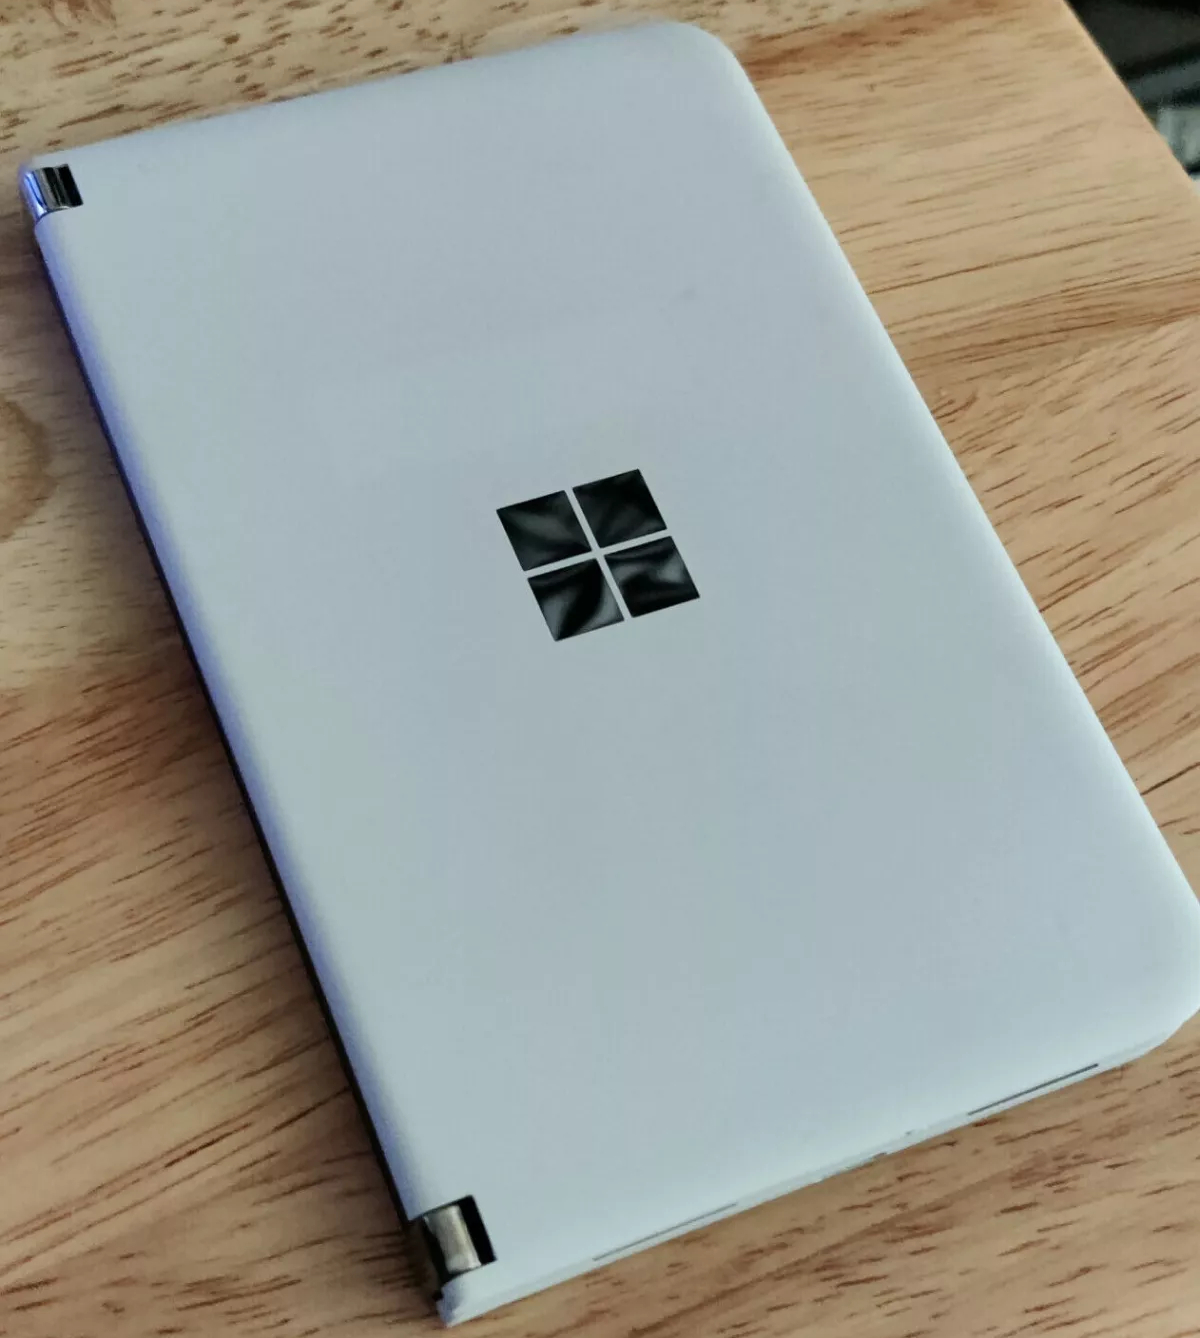 Microsoft Surface Duo leaked images